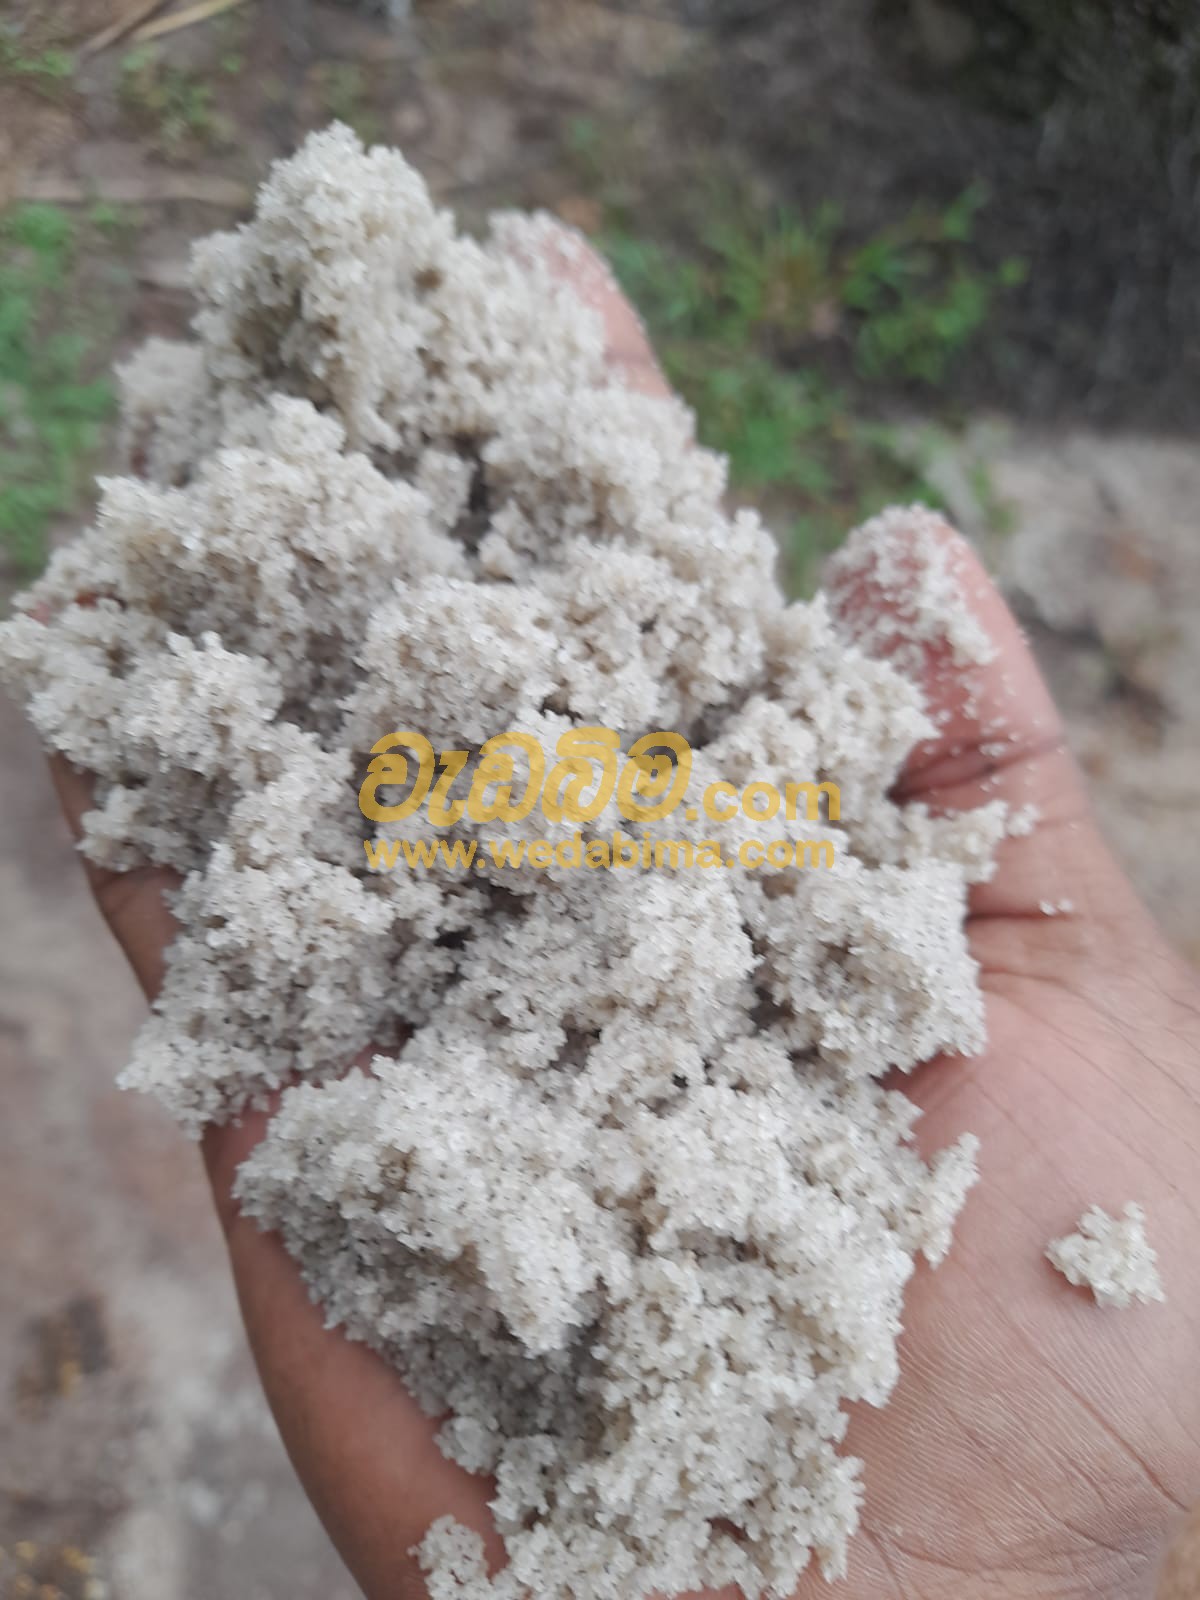 Silica Sand for Glass Making